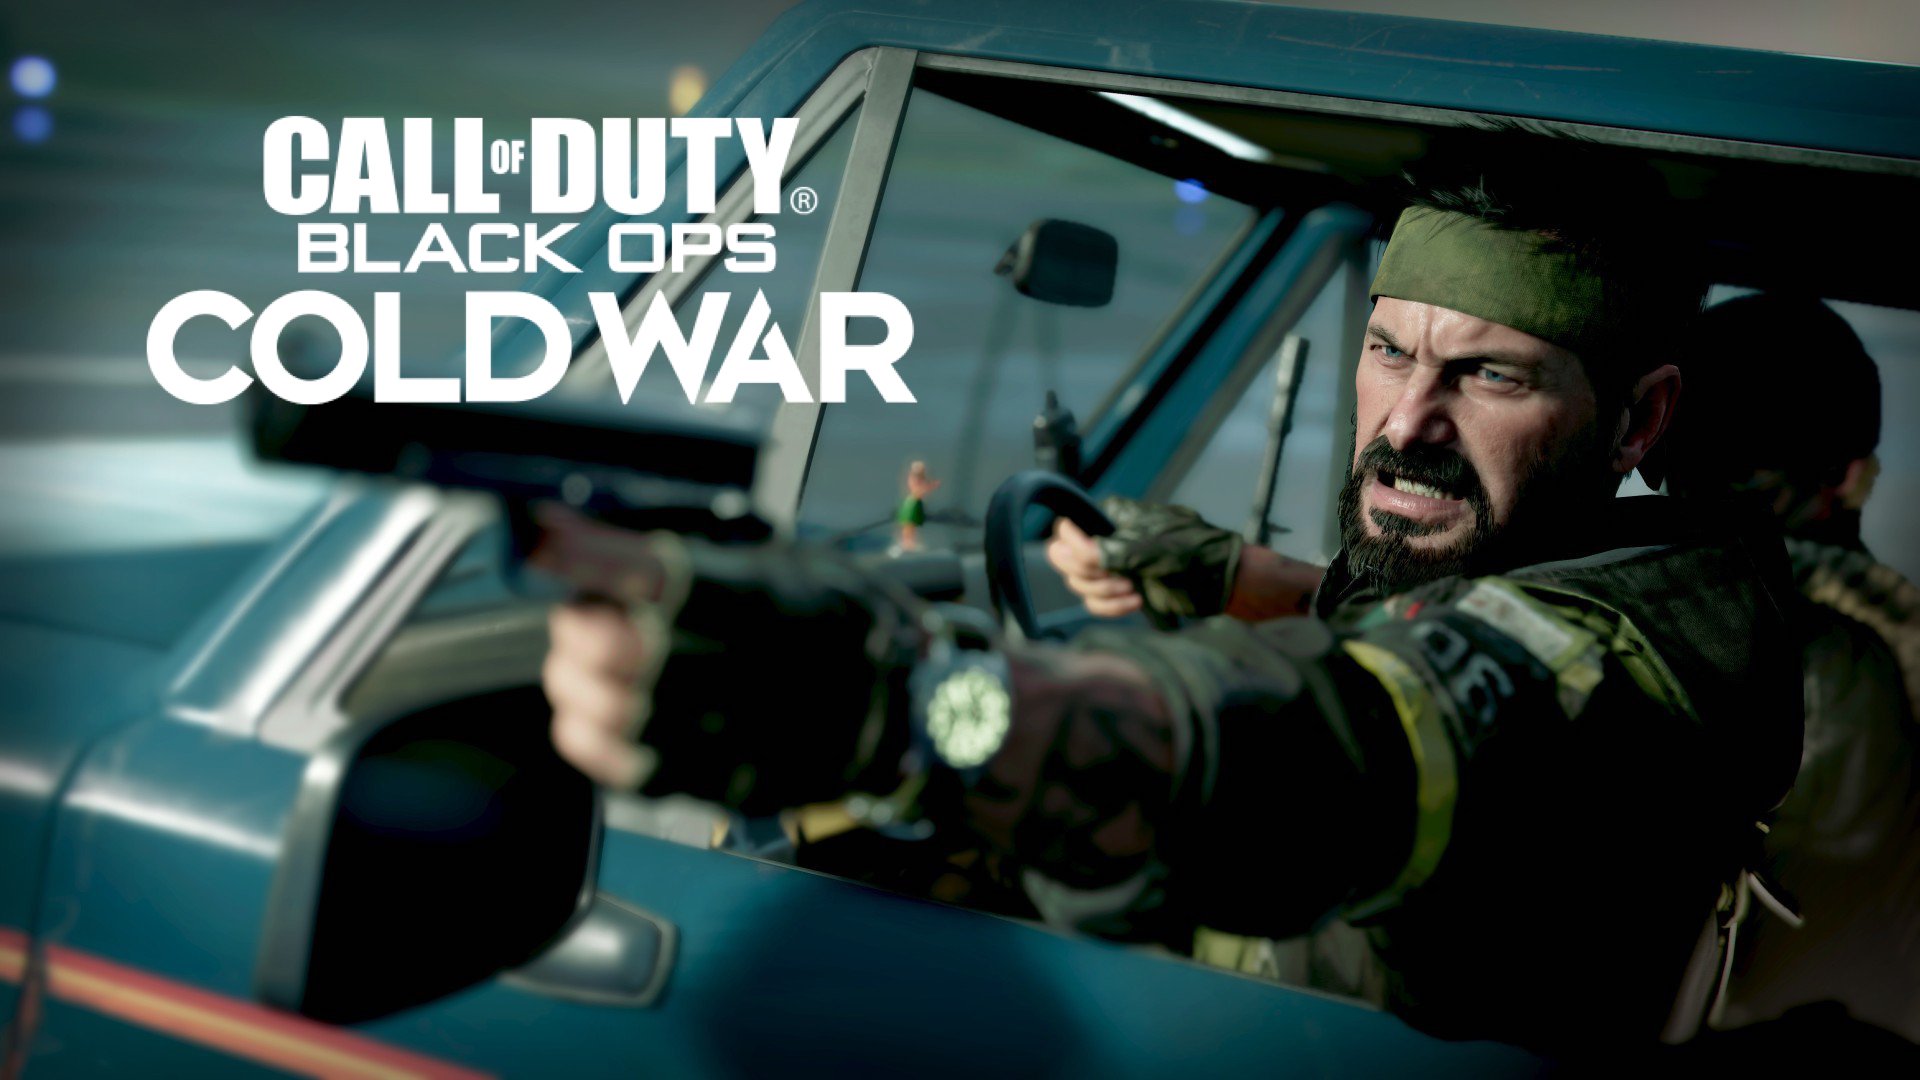 call of duty black ops cold war initial release date